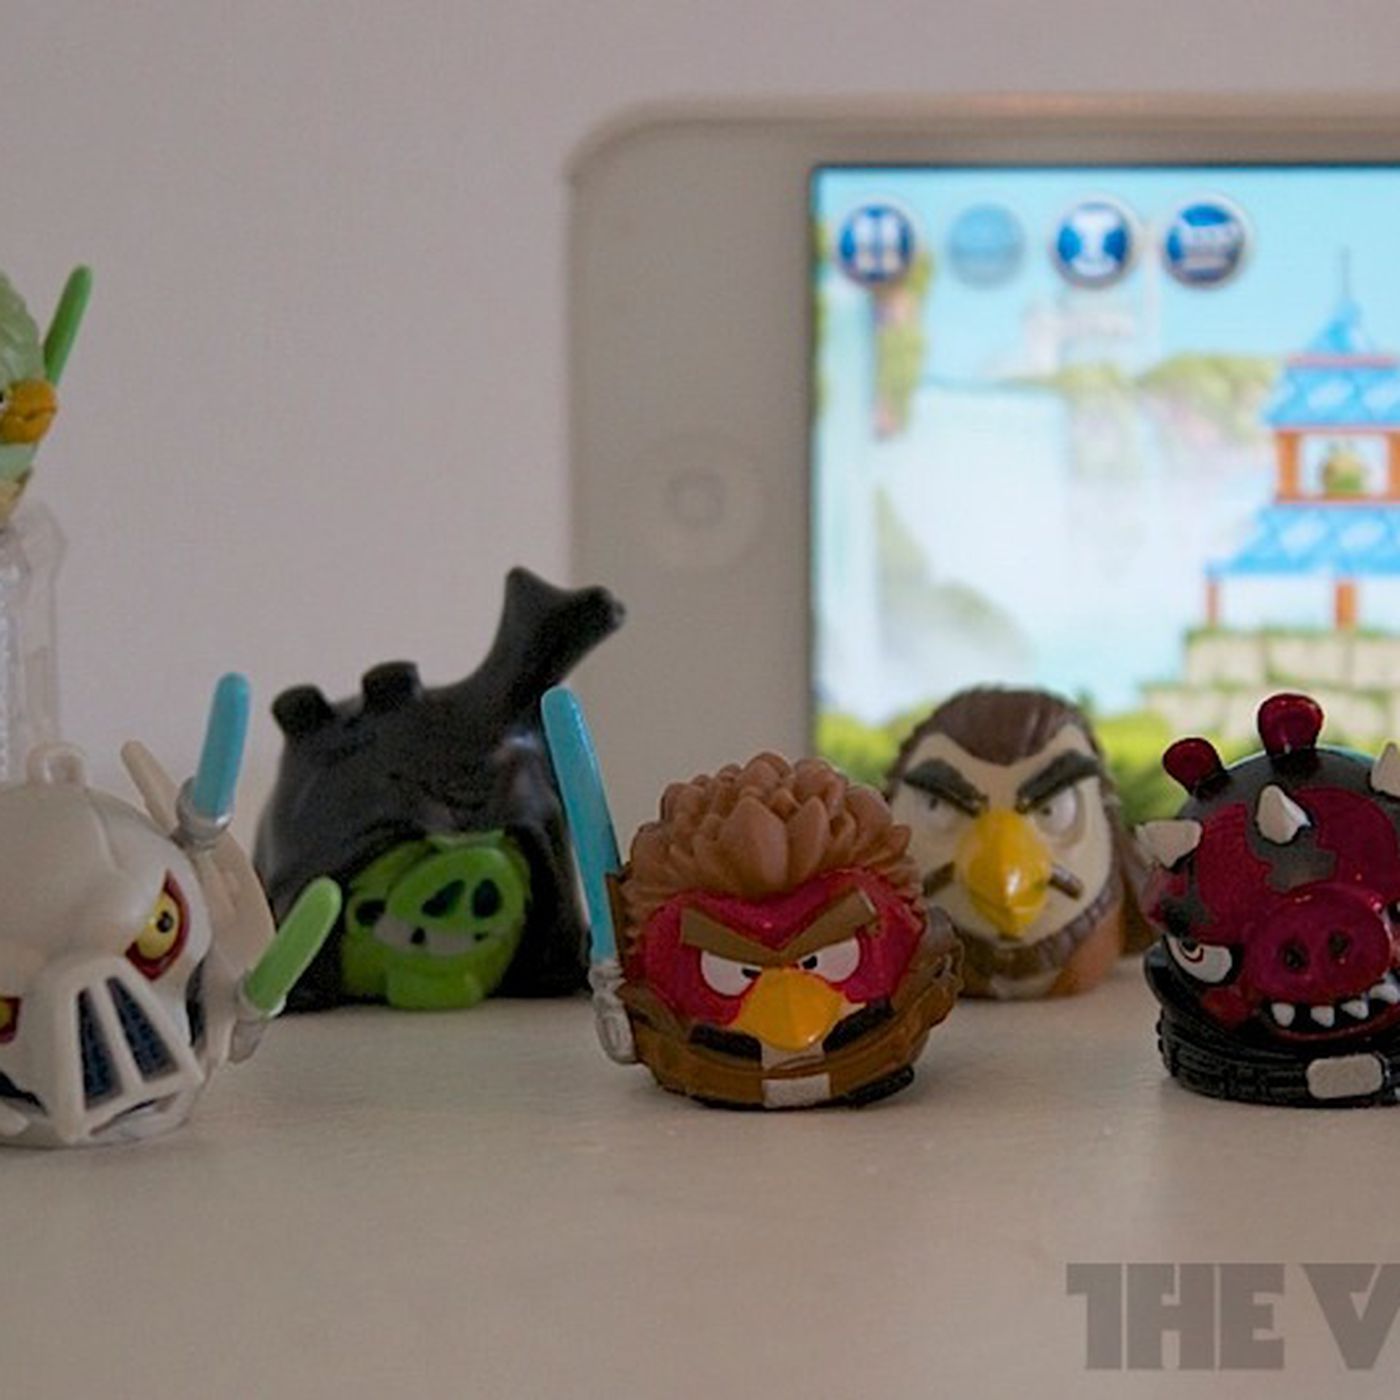 Hasbro Star Wars Angry Birds Action Figure for sale online 